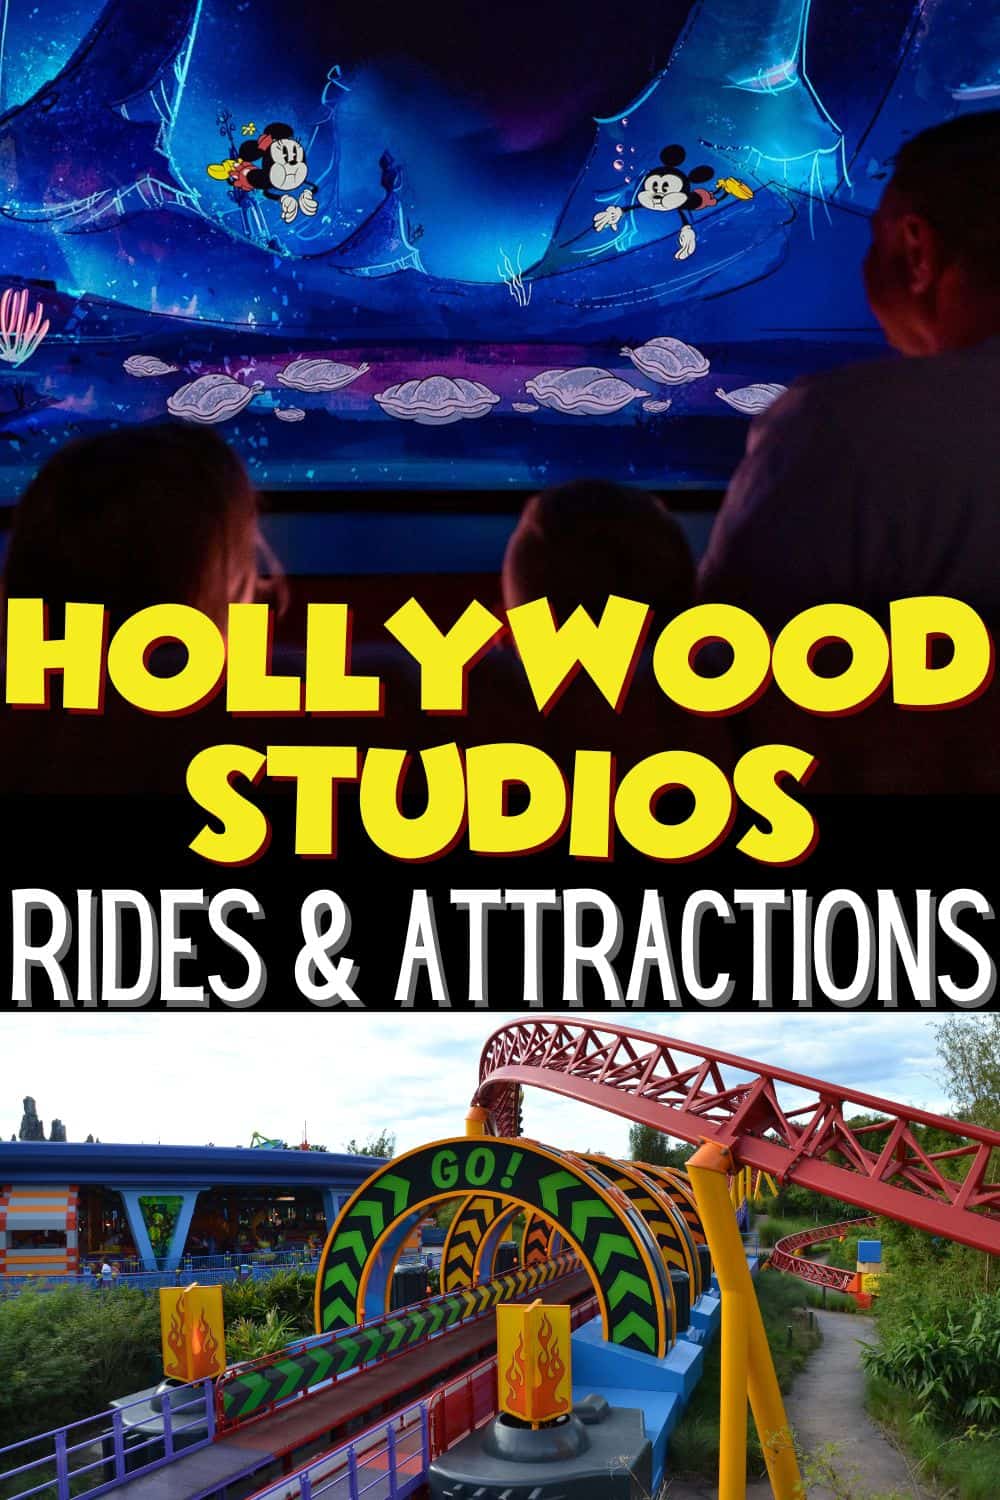 Don't Miss these Hollywood Studios Rides & Attractions